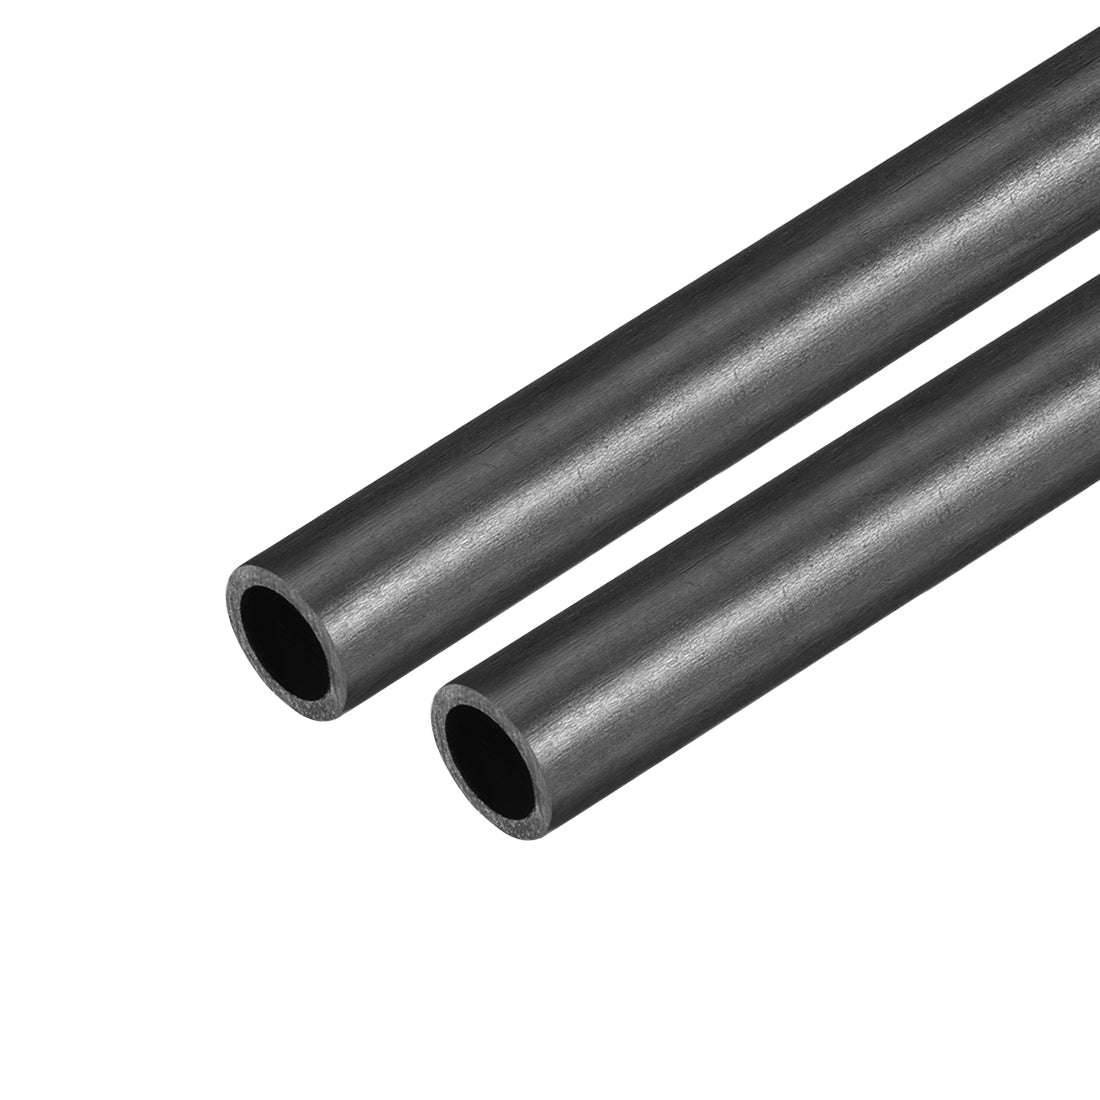 uxcell Uxcell Carbon Fiber Round Tube 7mm x 5mm x 800mm Carbon Fiber Wing Pultrusion Tubing for RC Airplane Quadcopter 2 Pcs